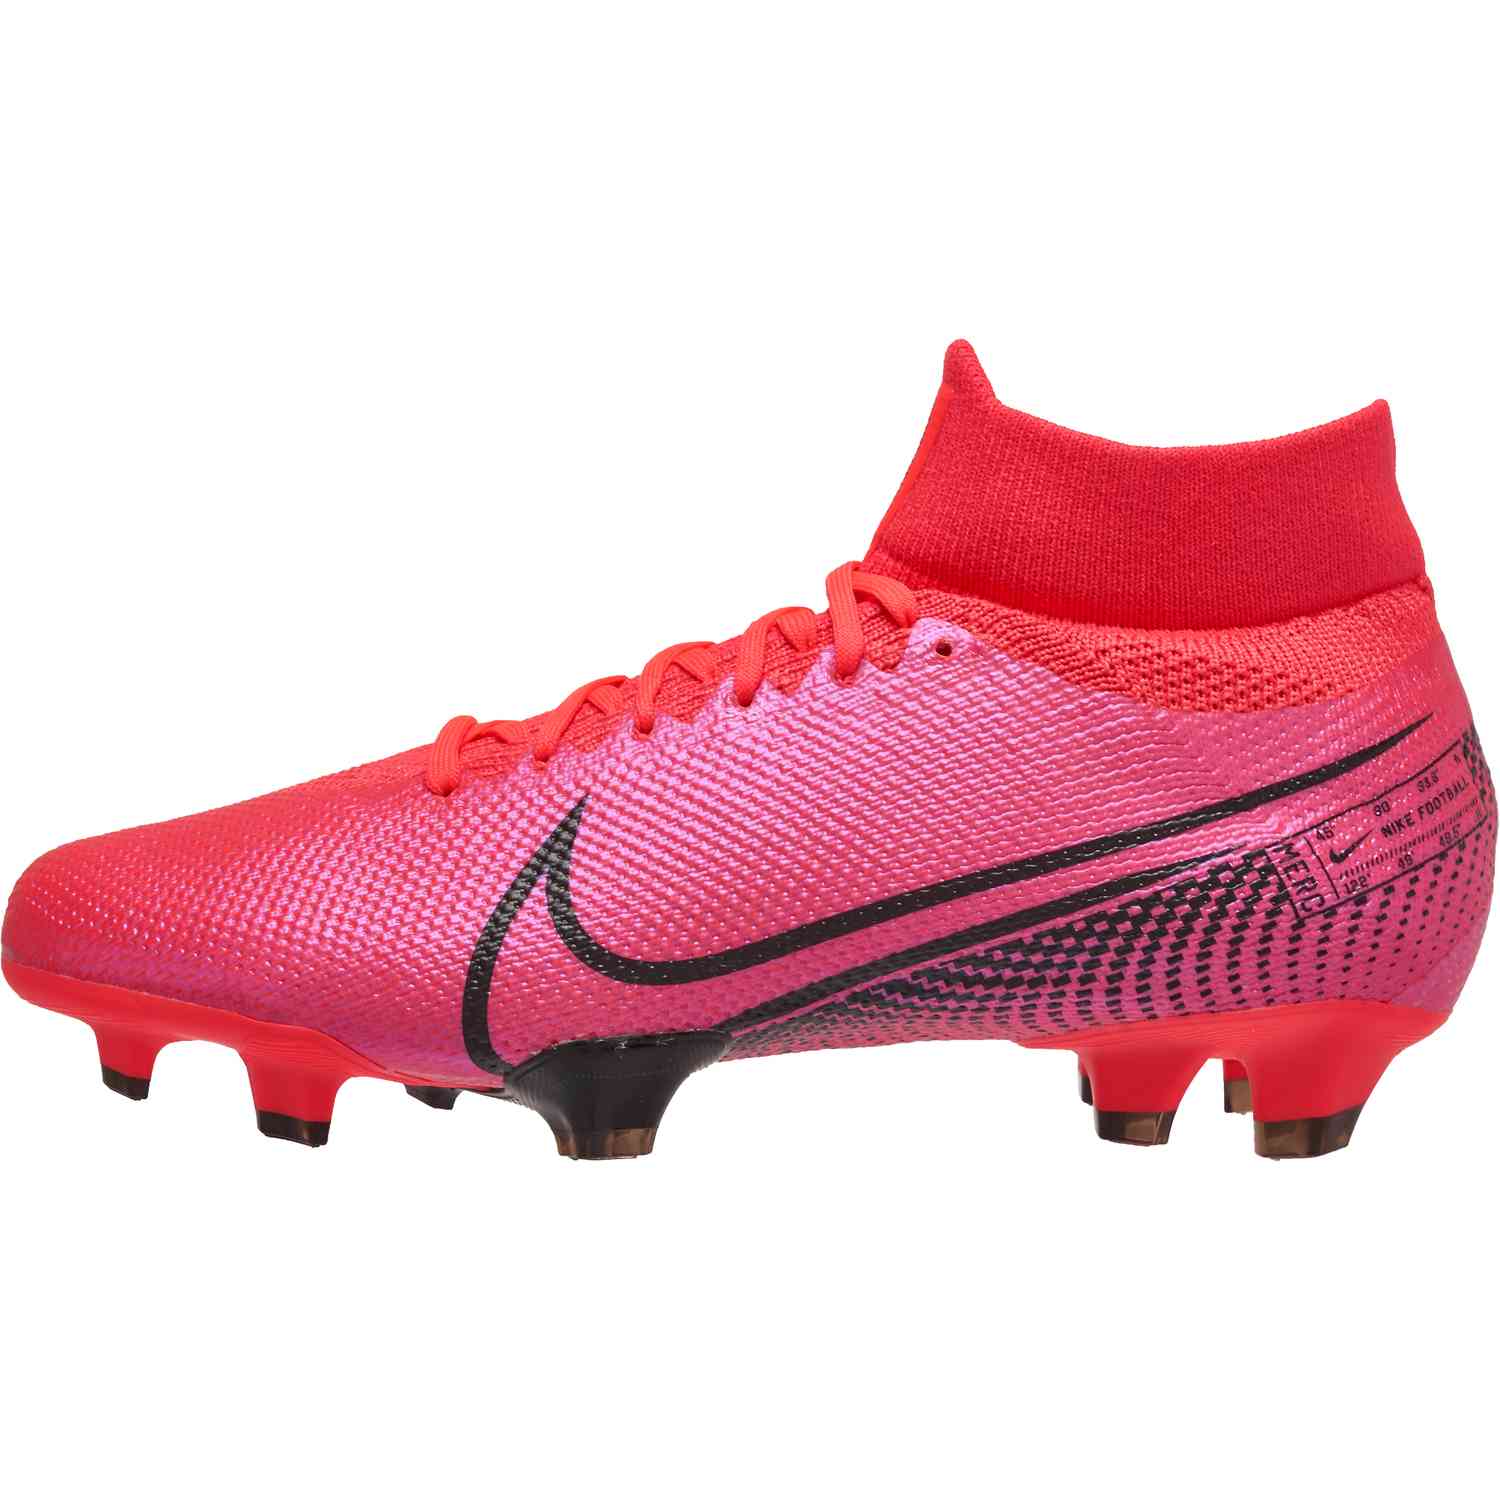 Nike Mercurial Superfly Pro FG - Future Lab - Soccer Master